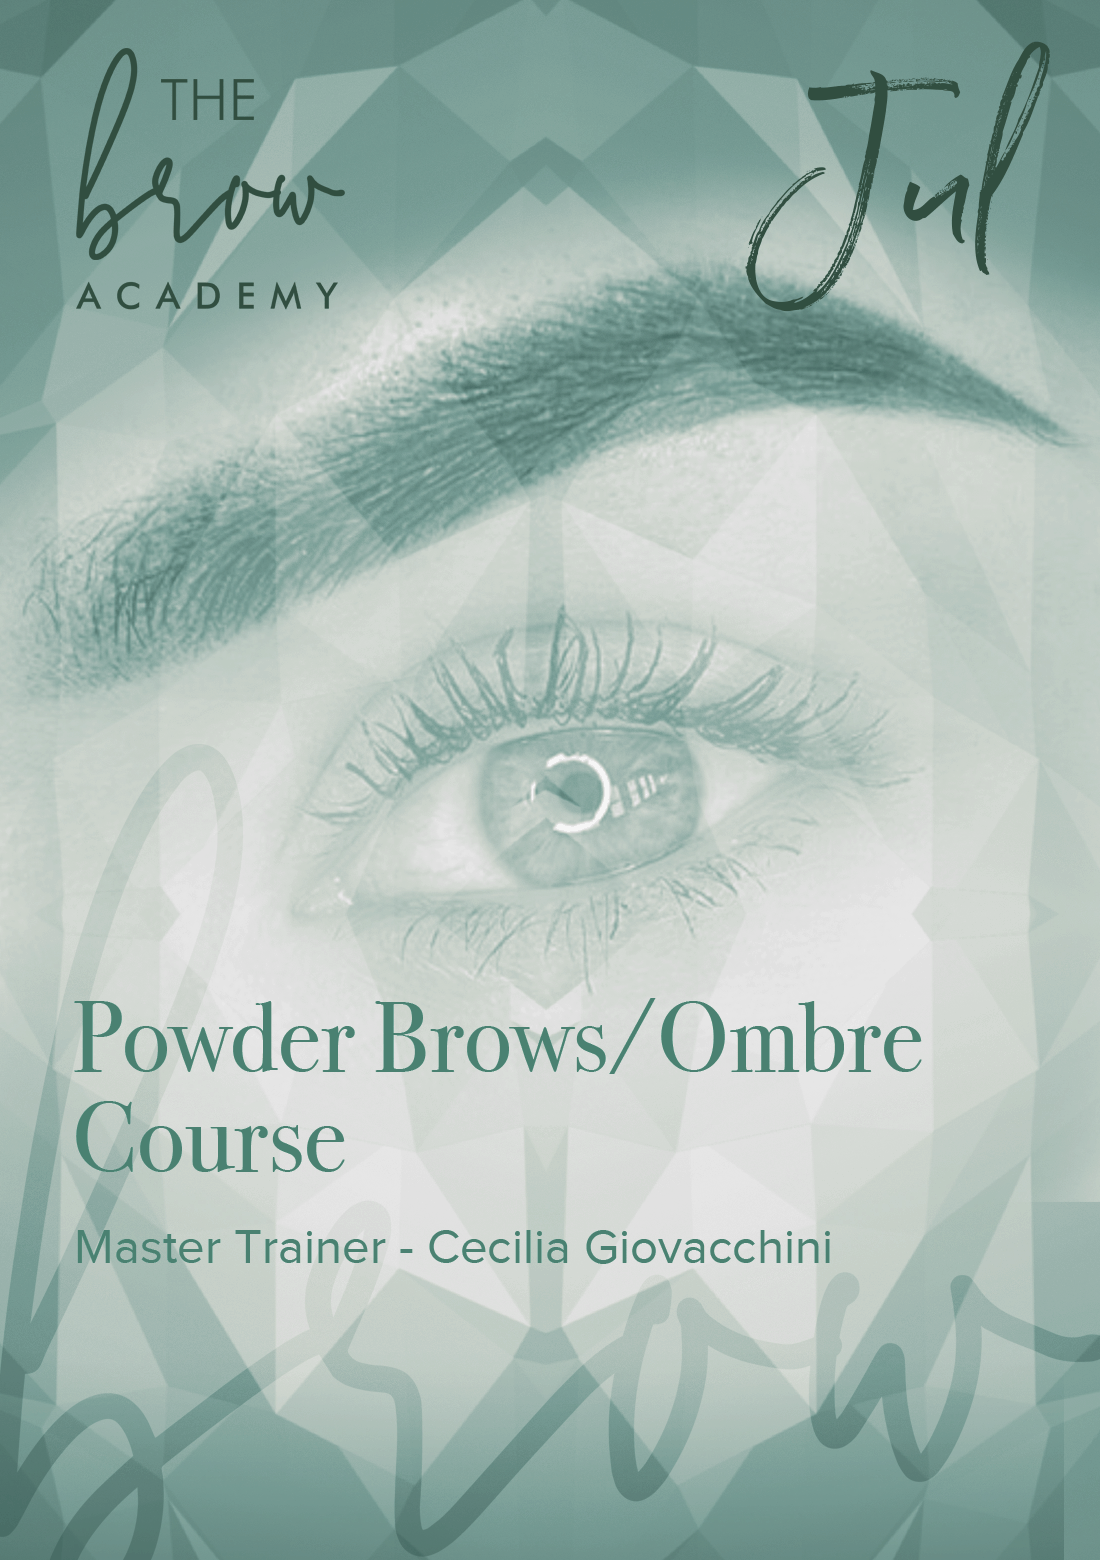 East Bay Powder Brows Ombre Courses - July